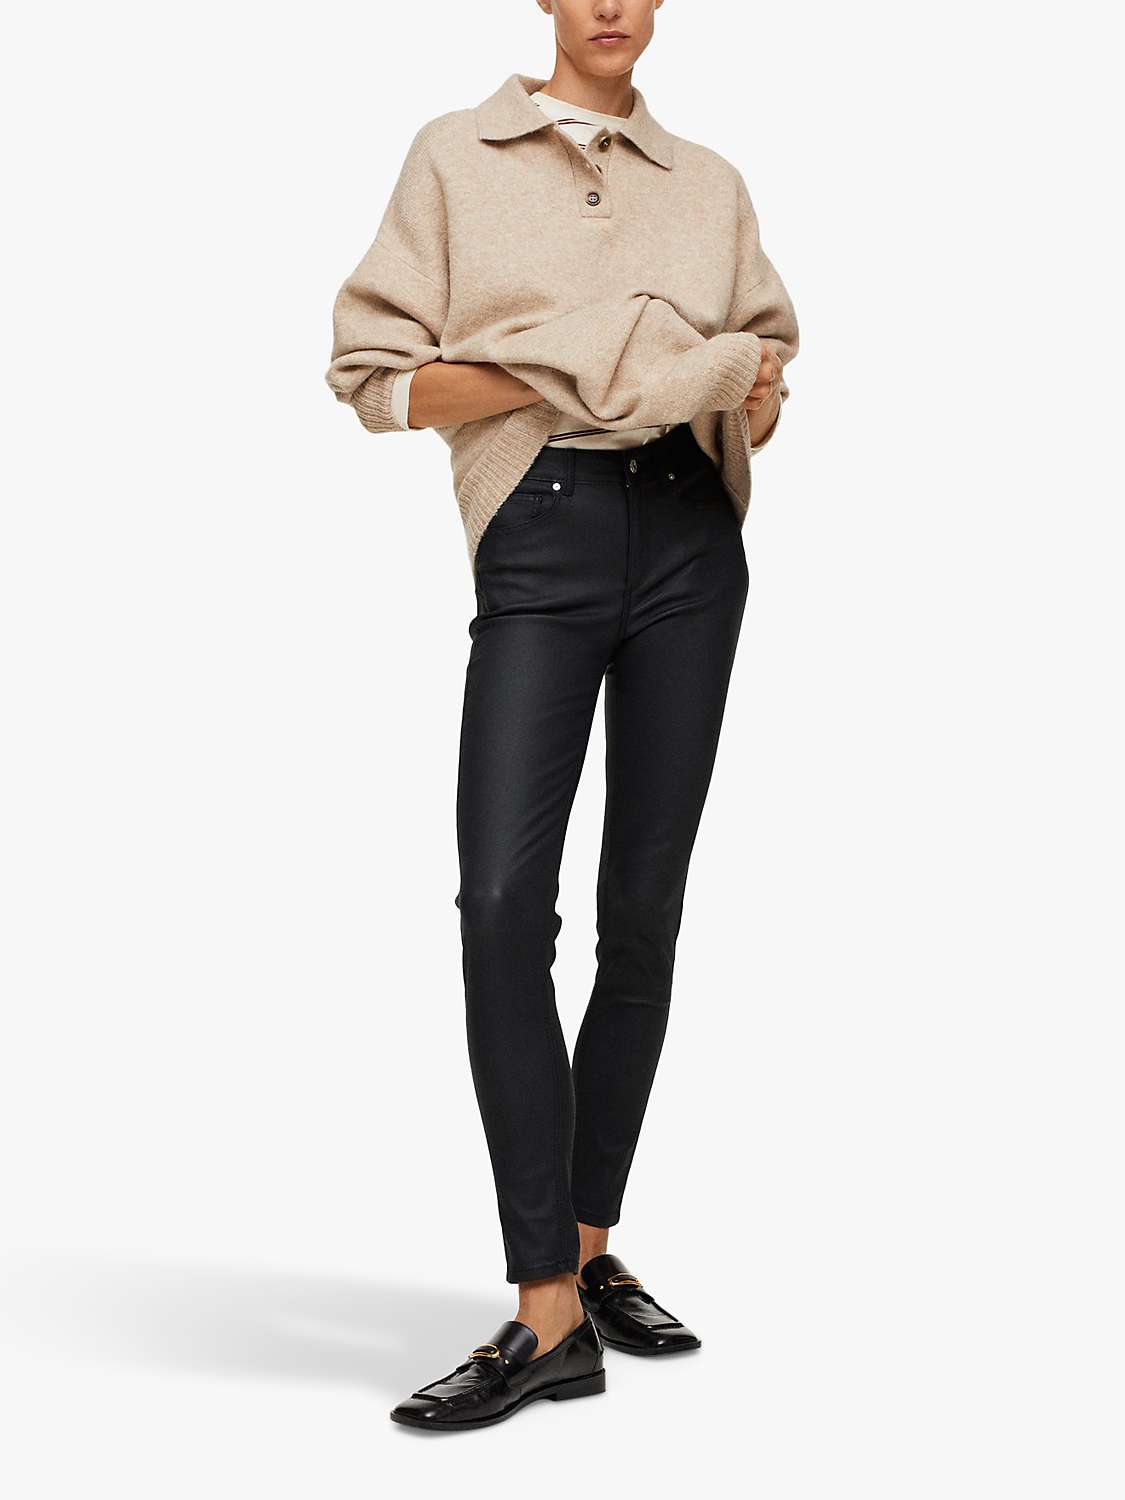 Buy Mango Skinny Faux Leather Push Up Jeans, Black Online at johnlewis.com